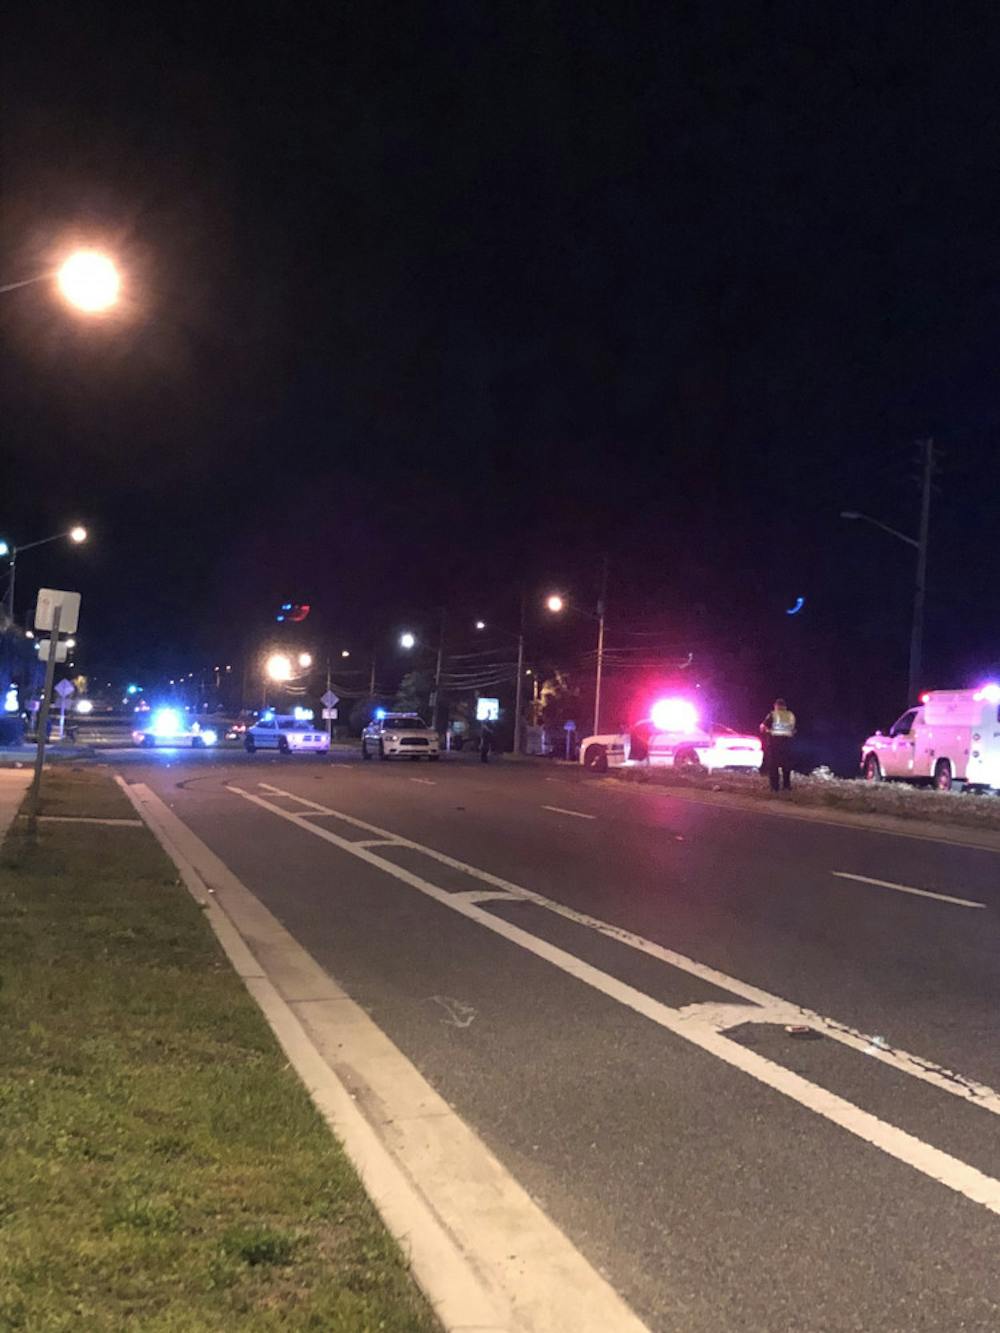 <div dir="auto">A woman died at UF Health Shands after she was hit by a car while crossing Southwest 13th Street, according to Gainesville Police. </div><div class="yj6qo"> </div>